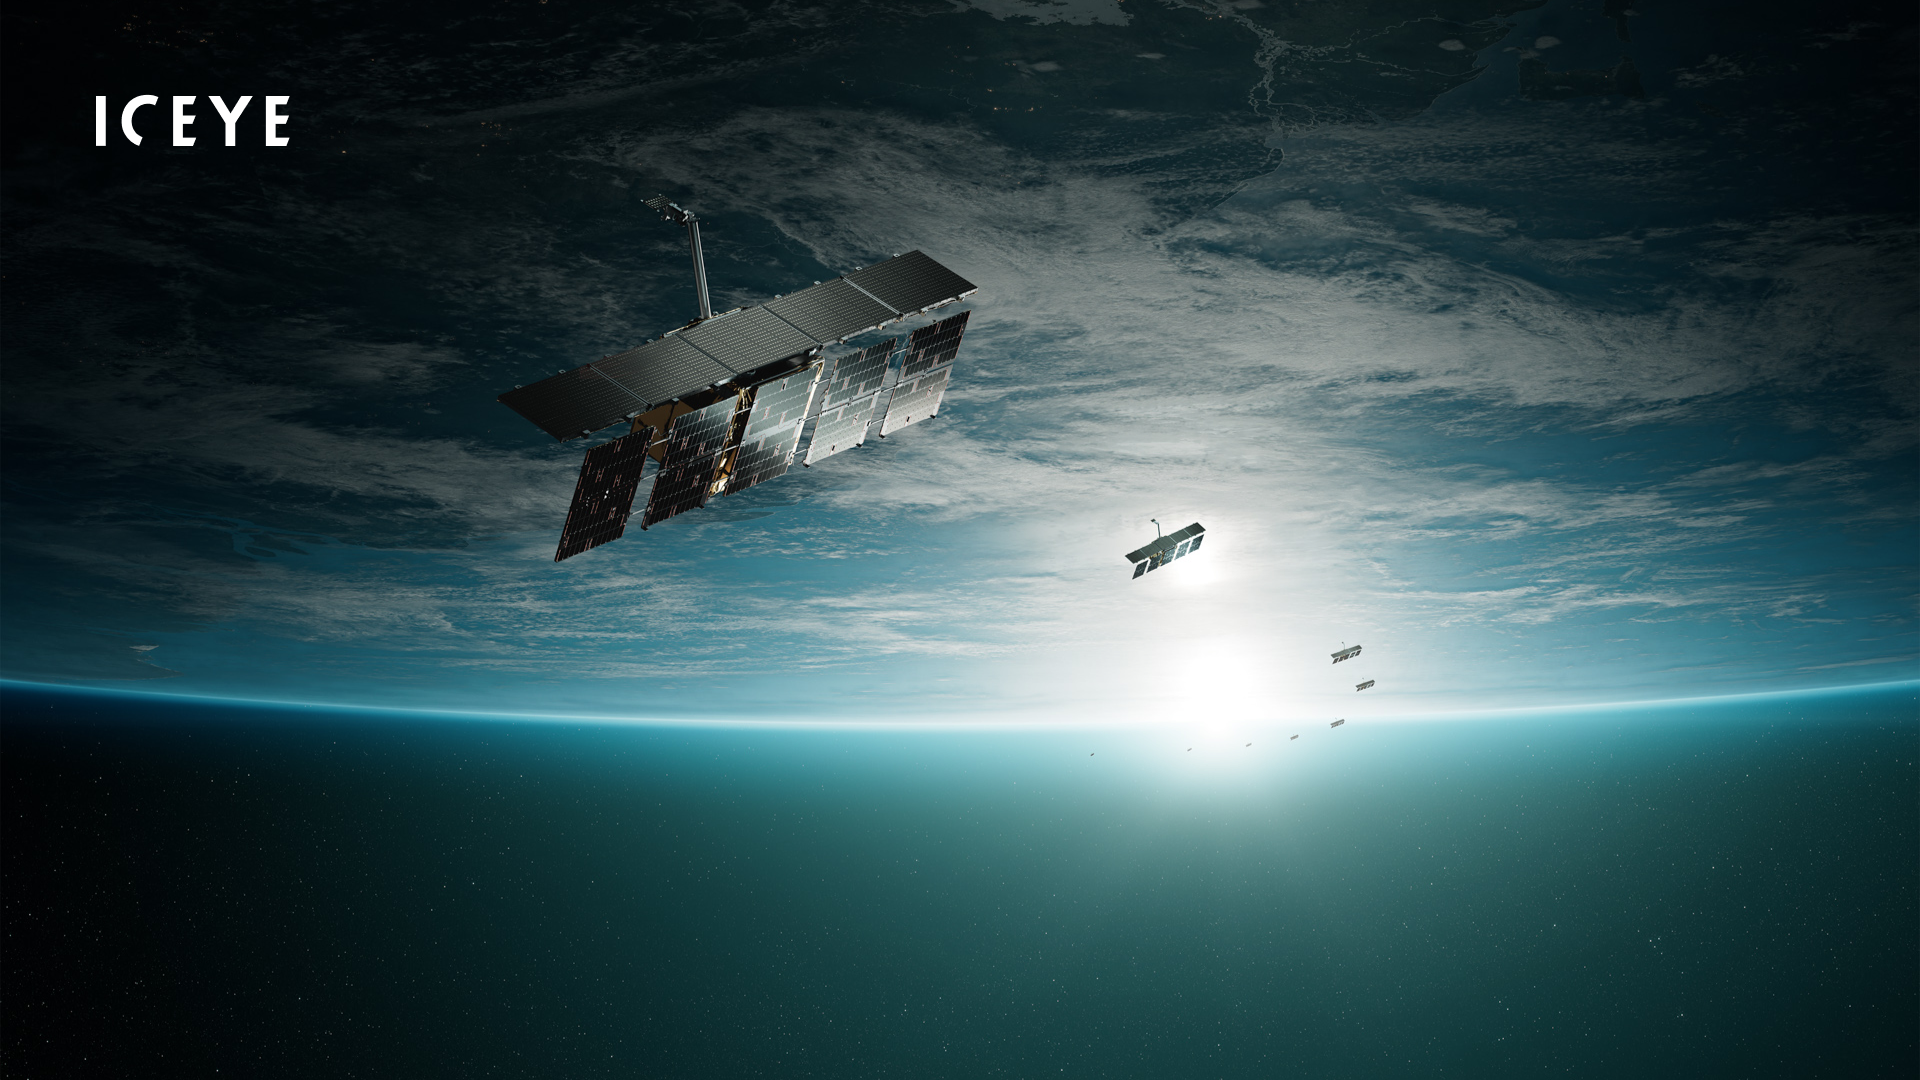 ICEYE strengthens cooperation with the Ministry of Defense of Ukraine on space defense